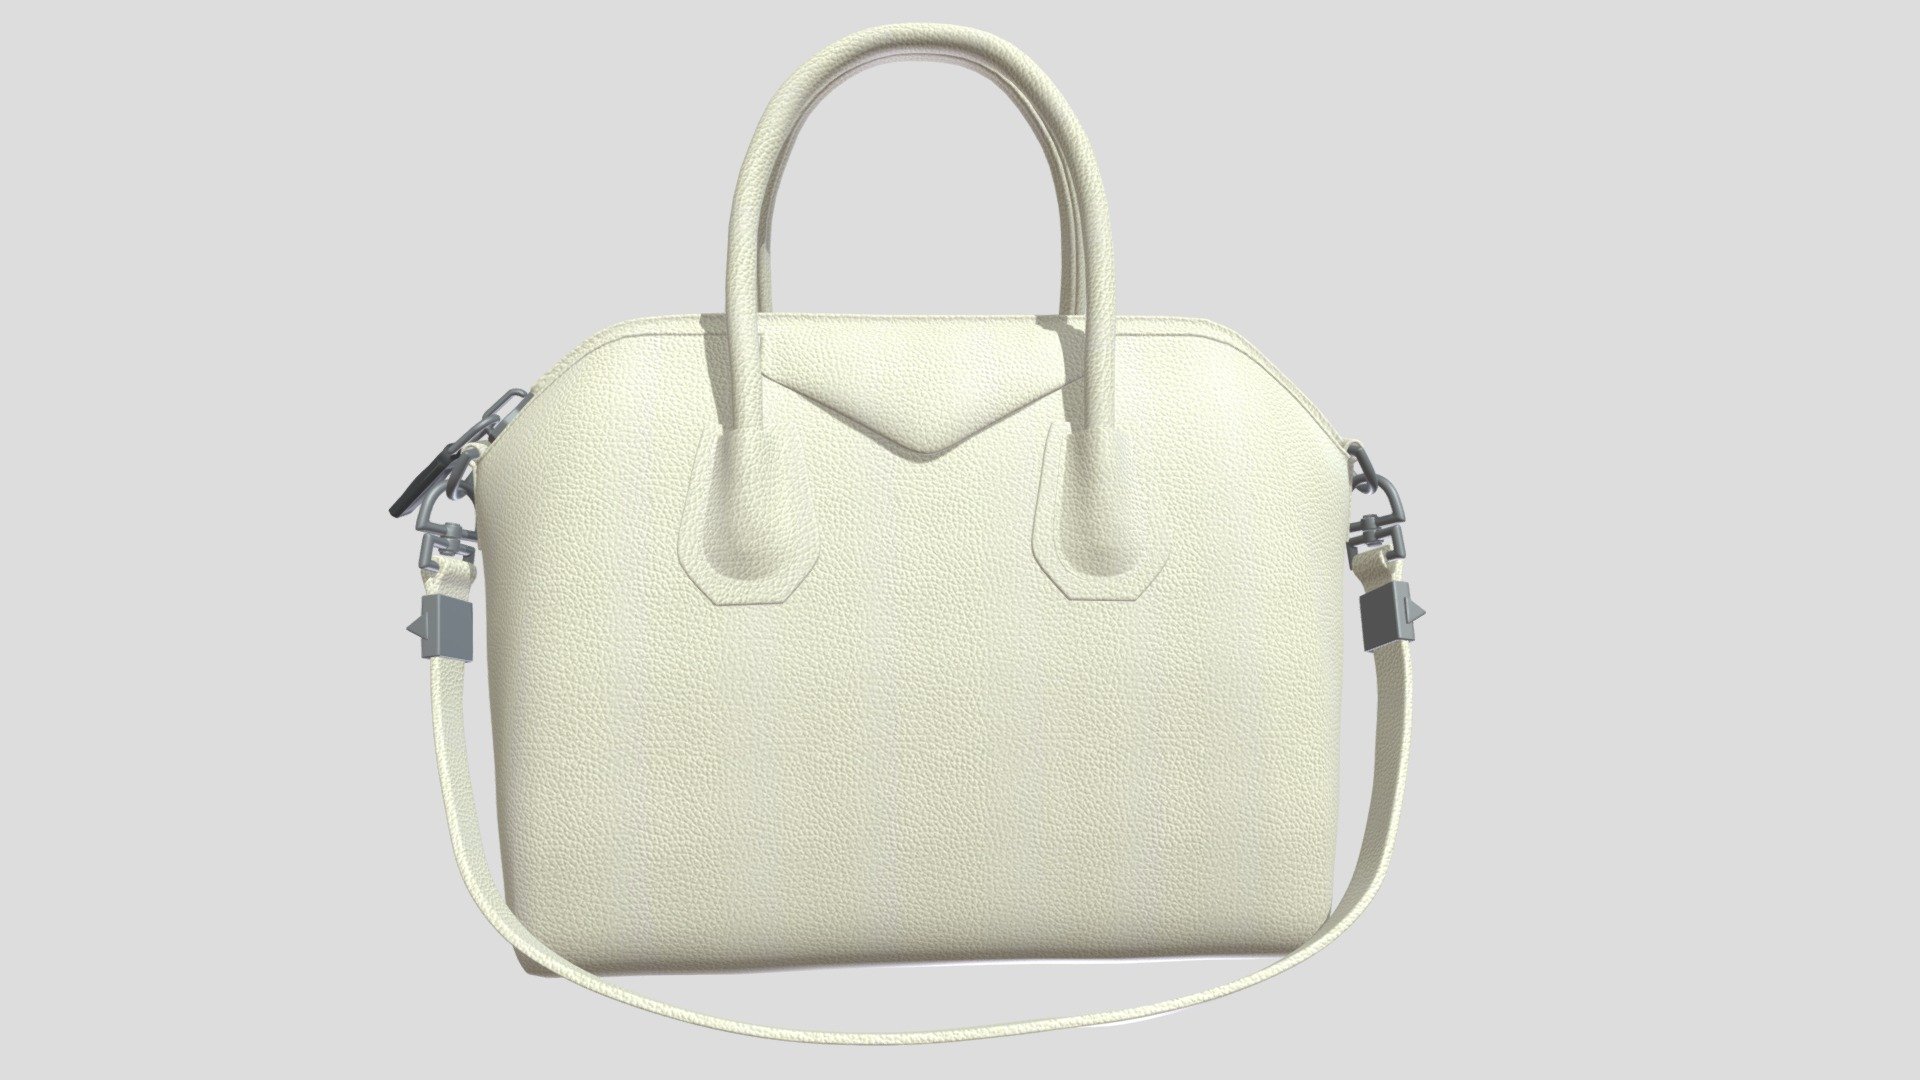 Handbag 3D model is a high quality, photo real model that will enhance detail and realism to any of your game projects or commercials. The model has a fully textured, detailed design that allows for close-up renders 3d model